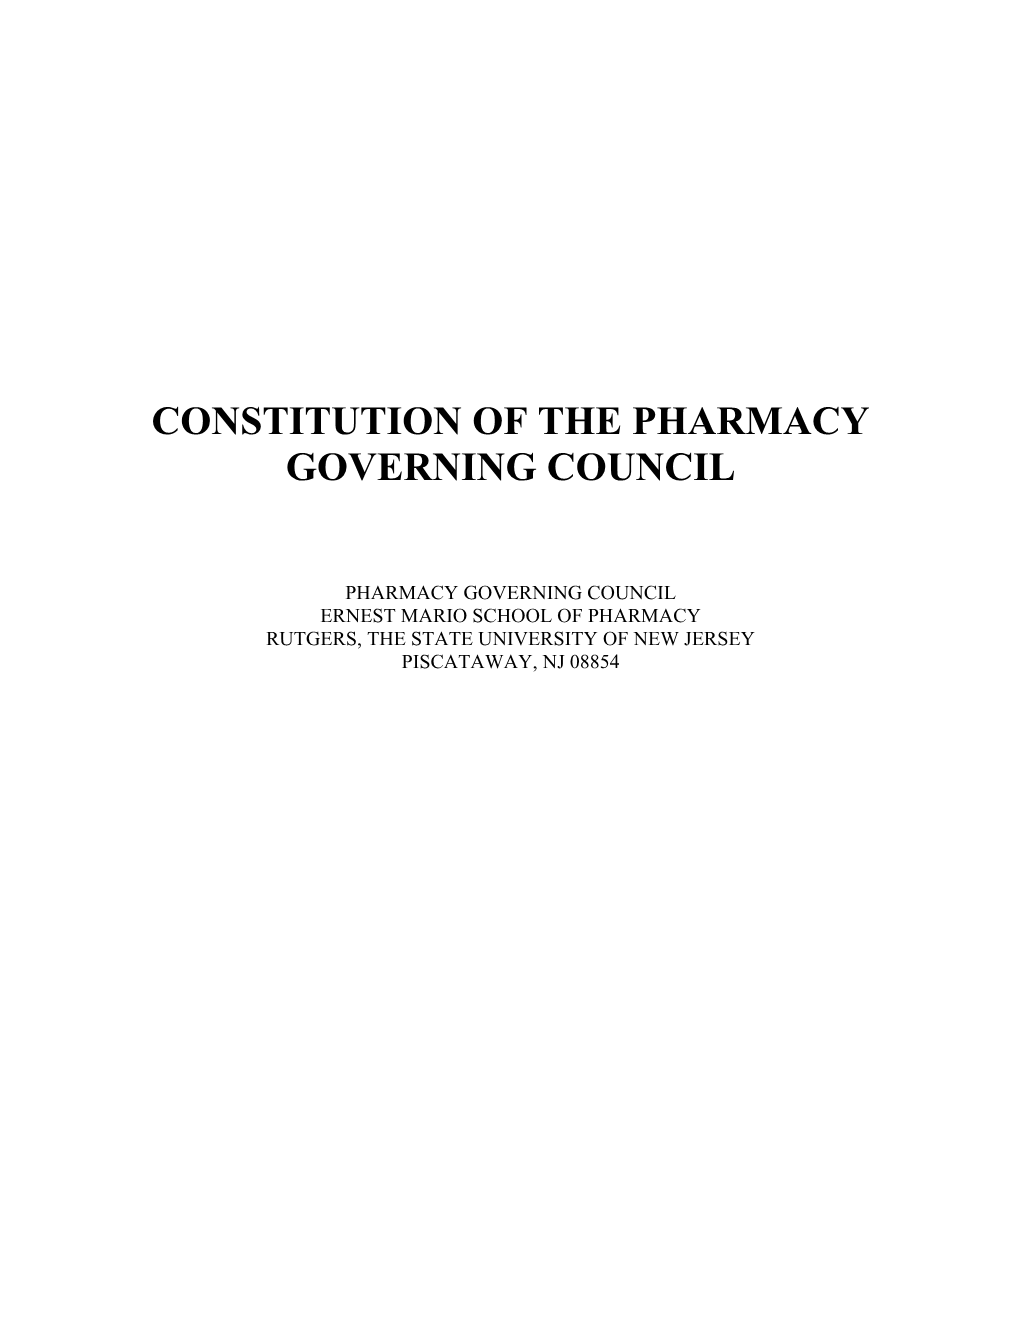 Constitution of the Pharmacy Governing Council